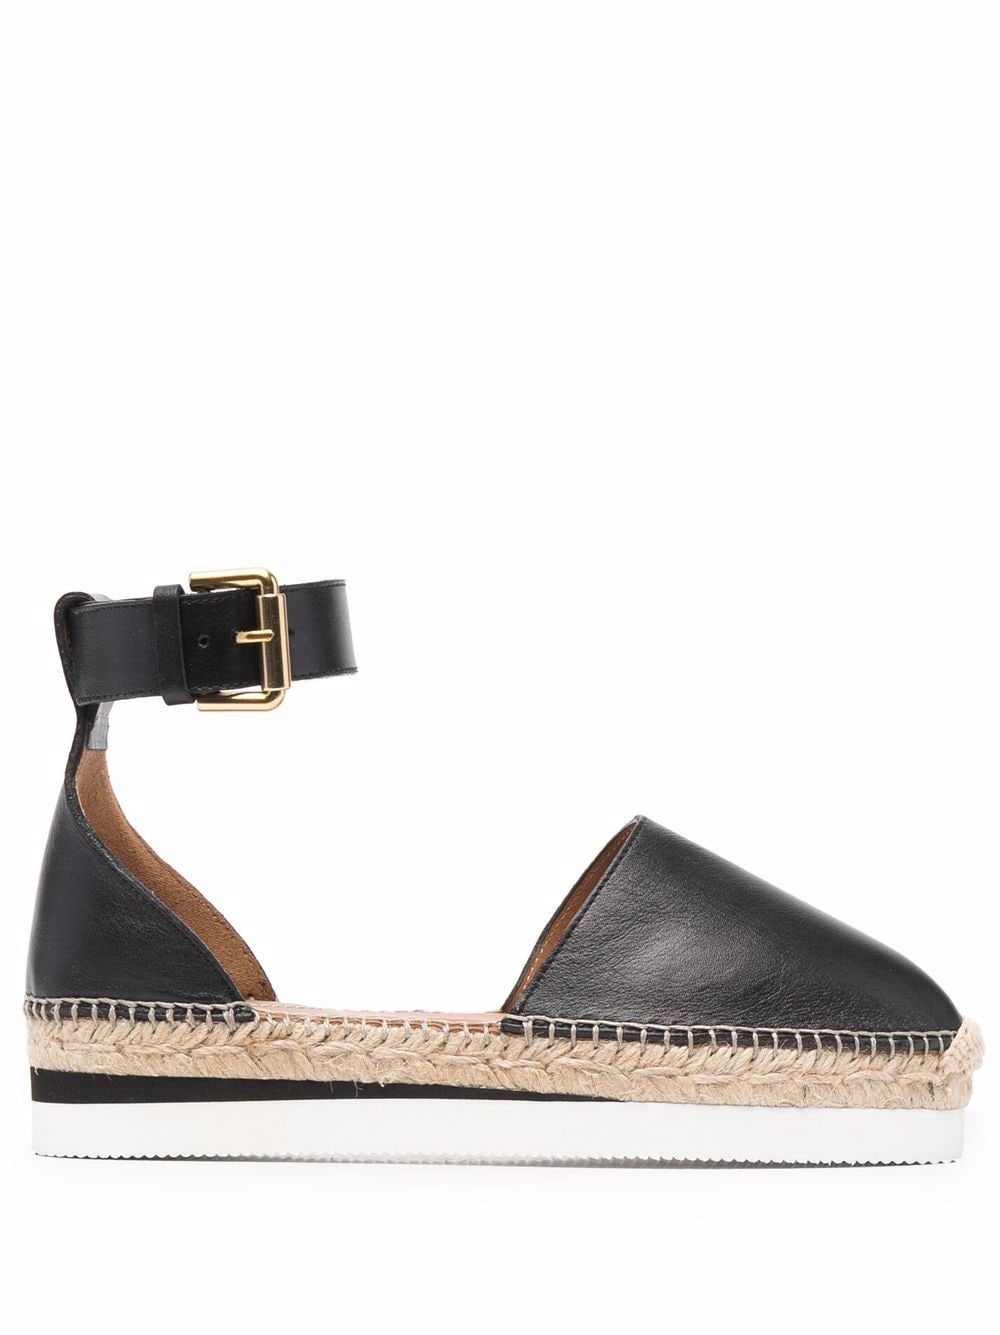 See by Chloé Glyn leather flat espadrilles - Black von See by Chloé